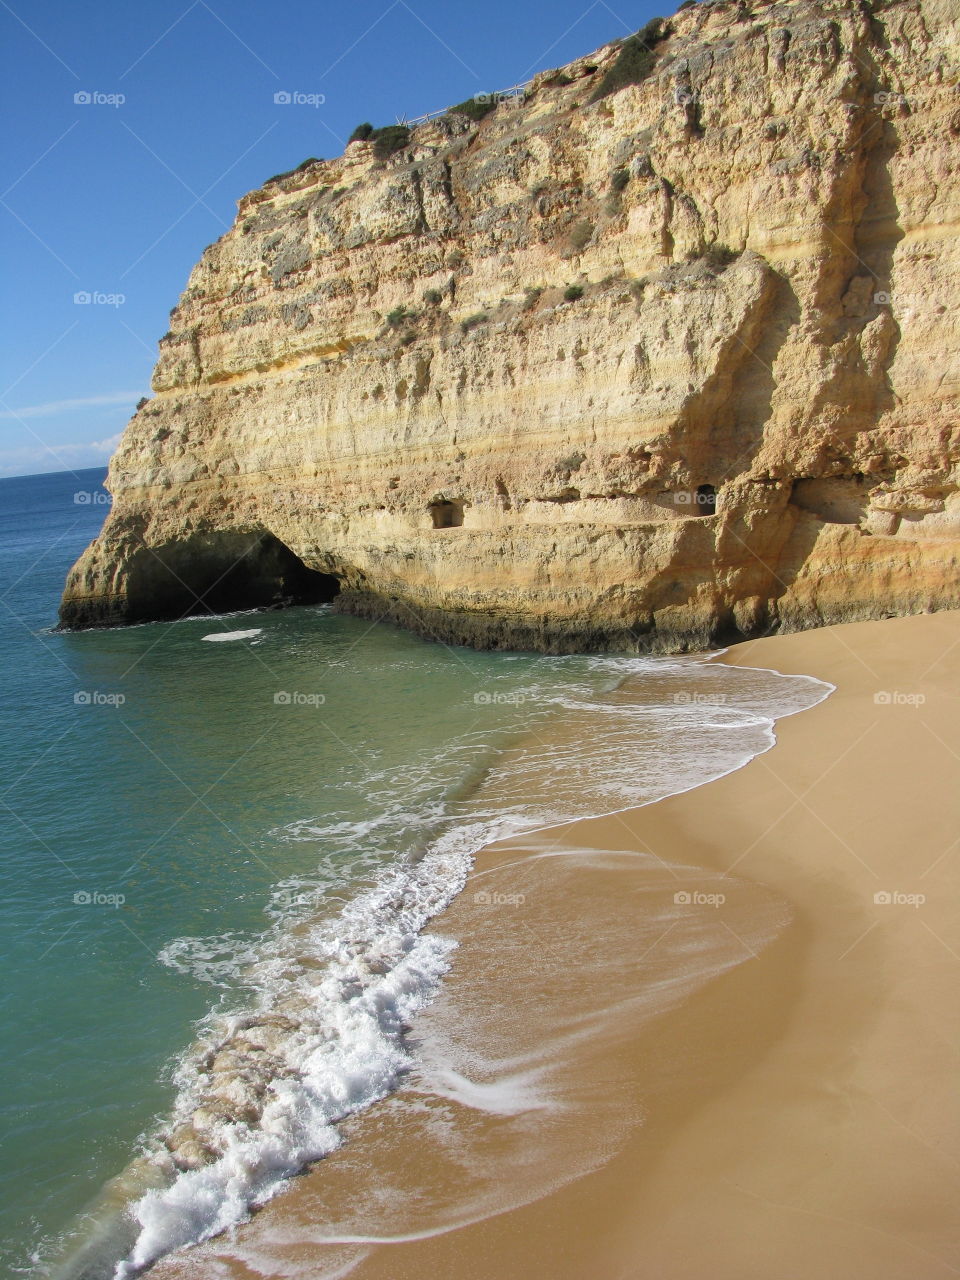 Algarve beach with old tunnel in the cliffs